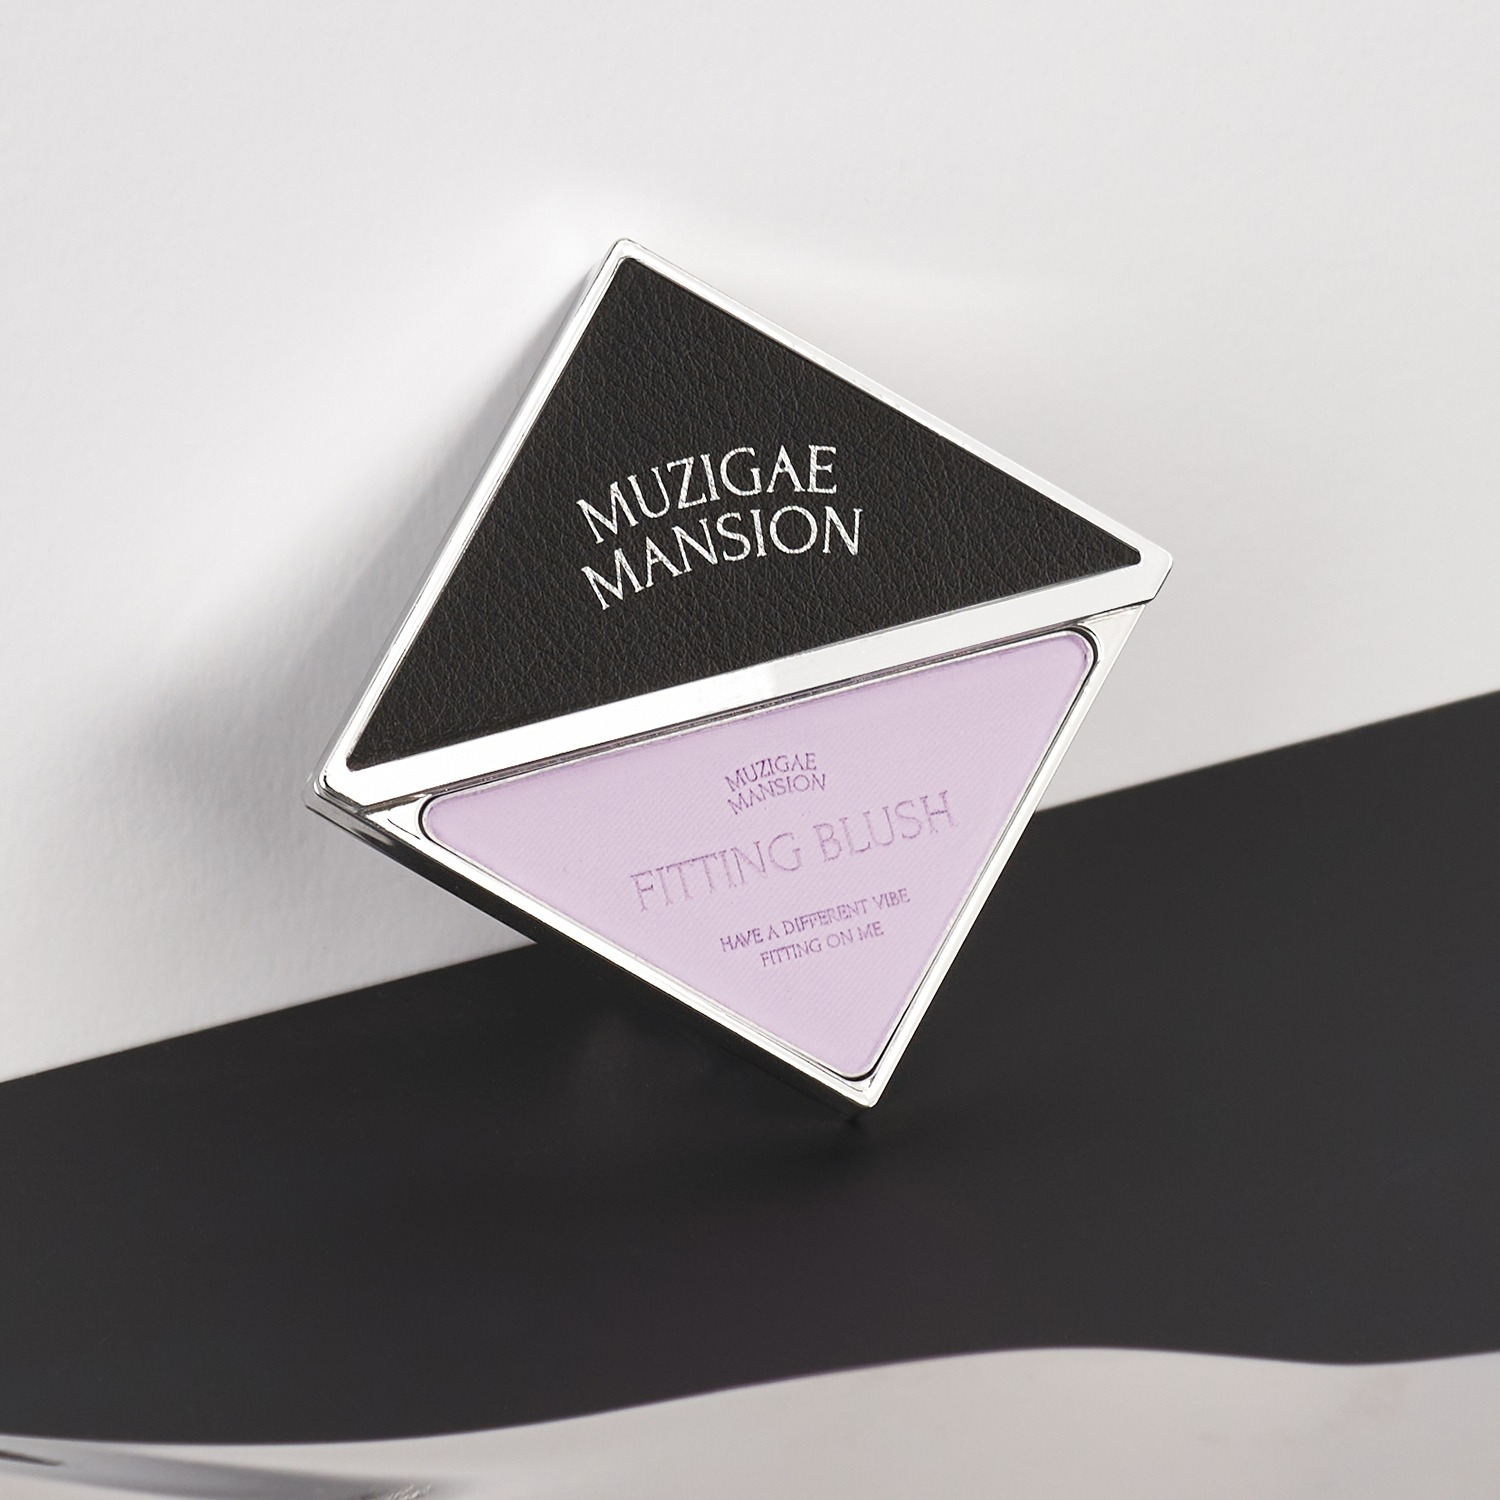 MUZIGAE MANSION Fitting Blush on sales on our Website !